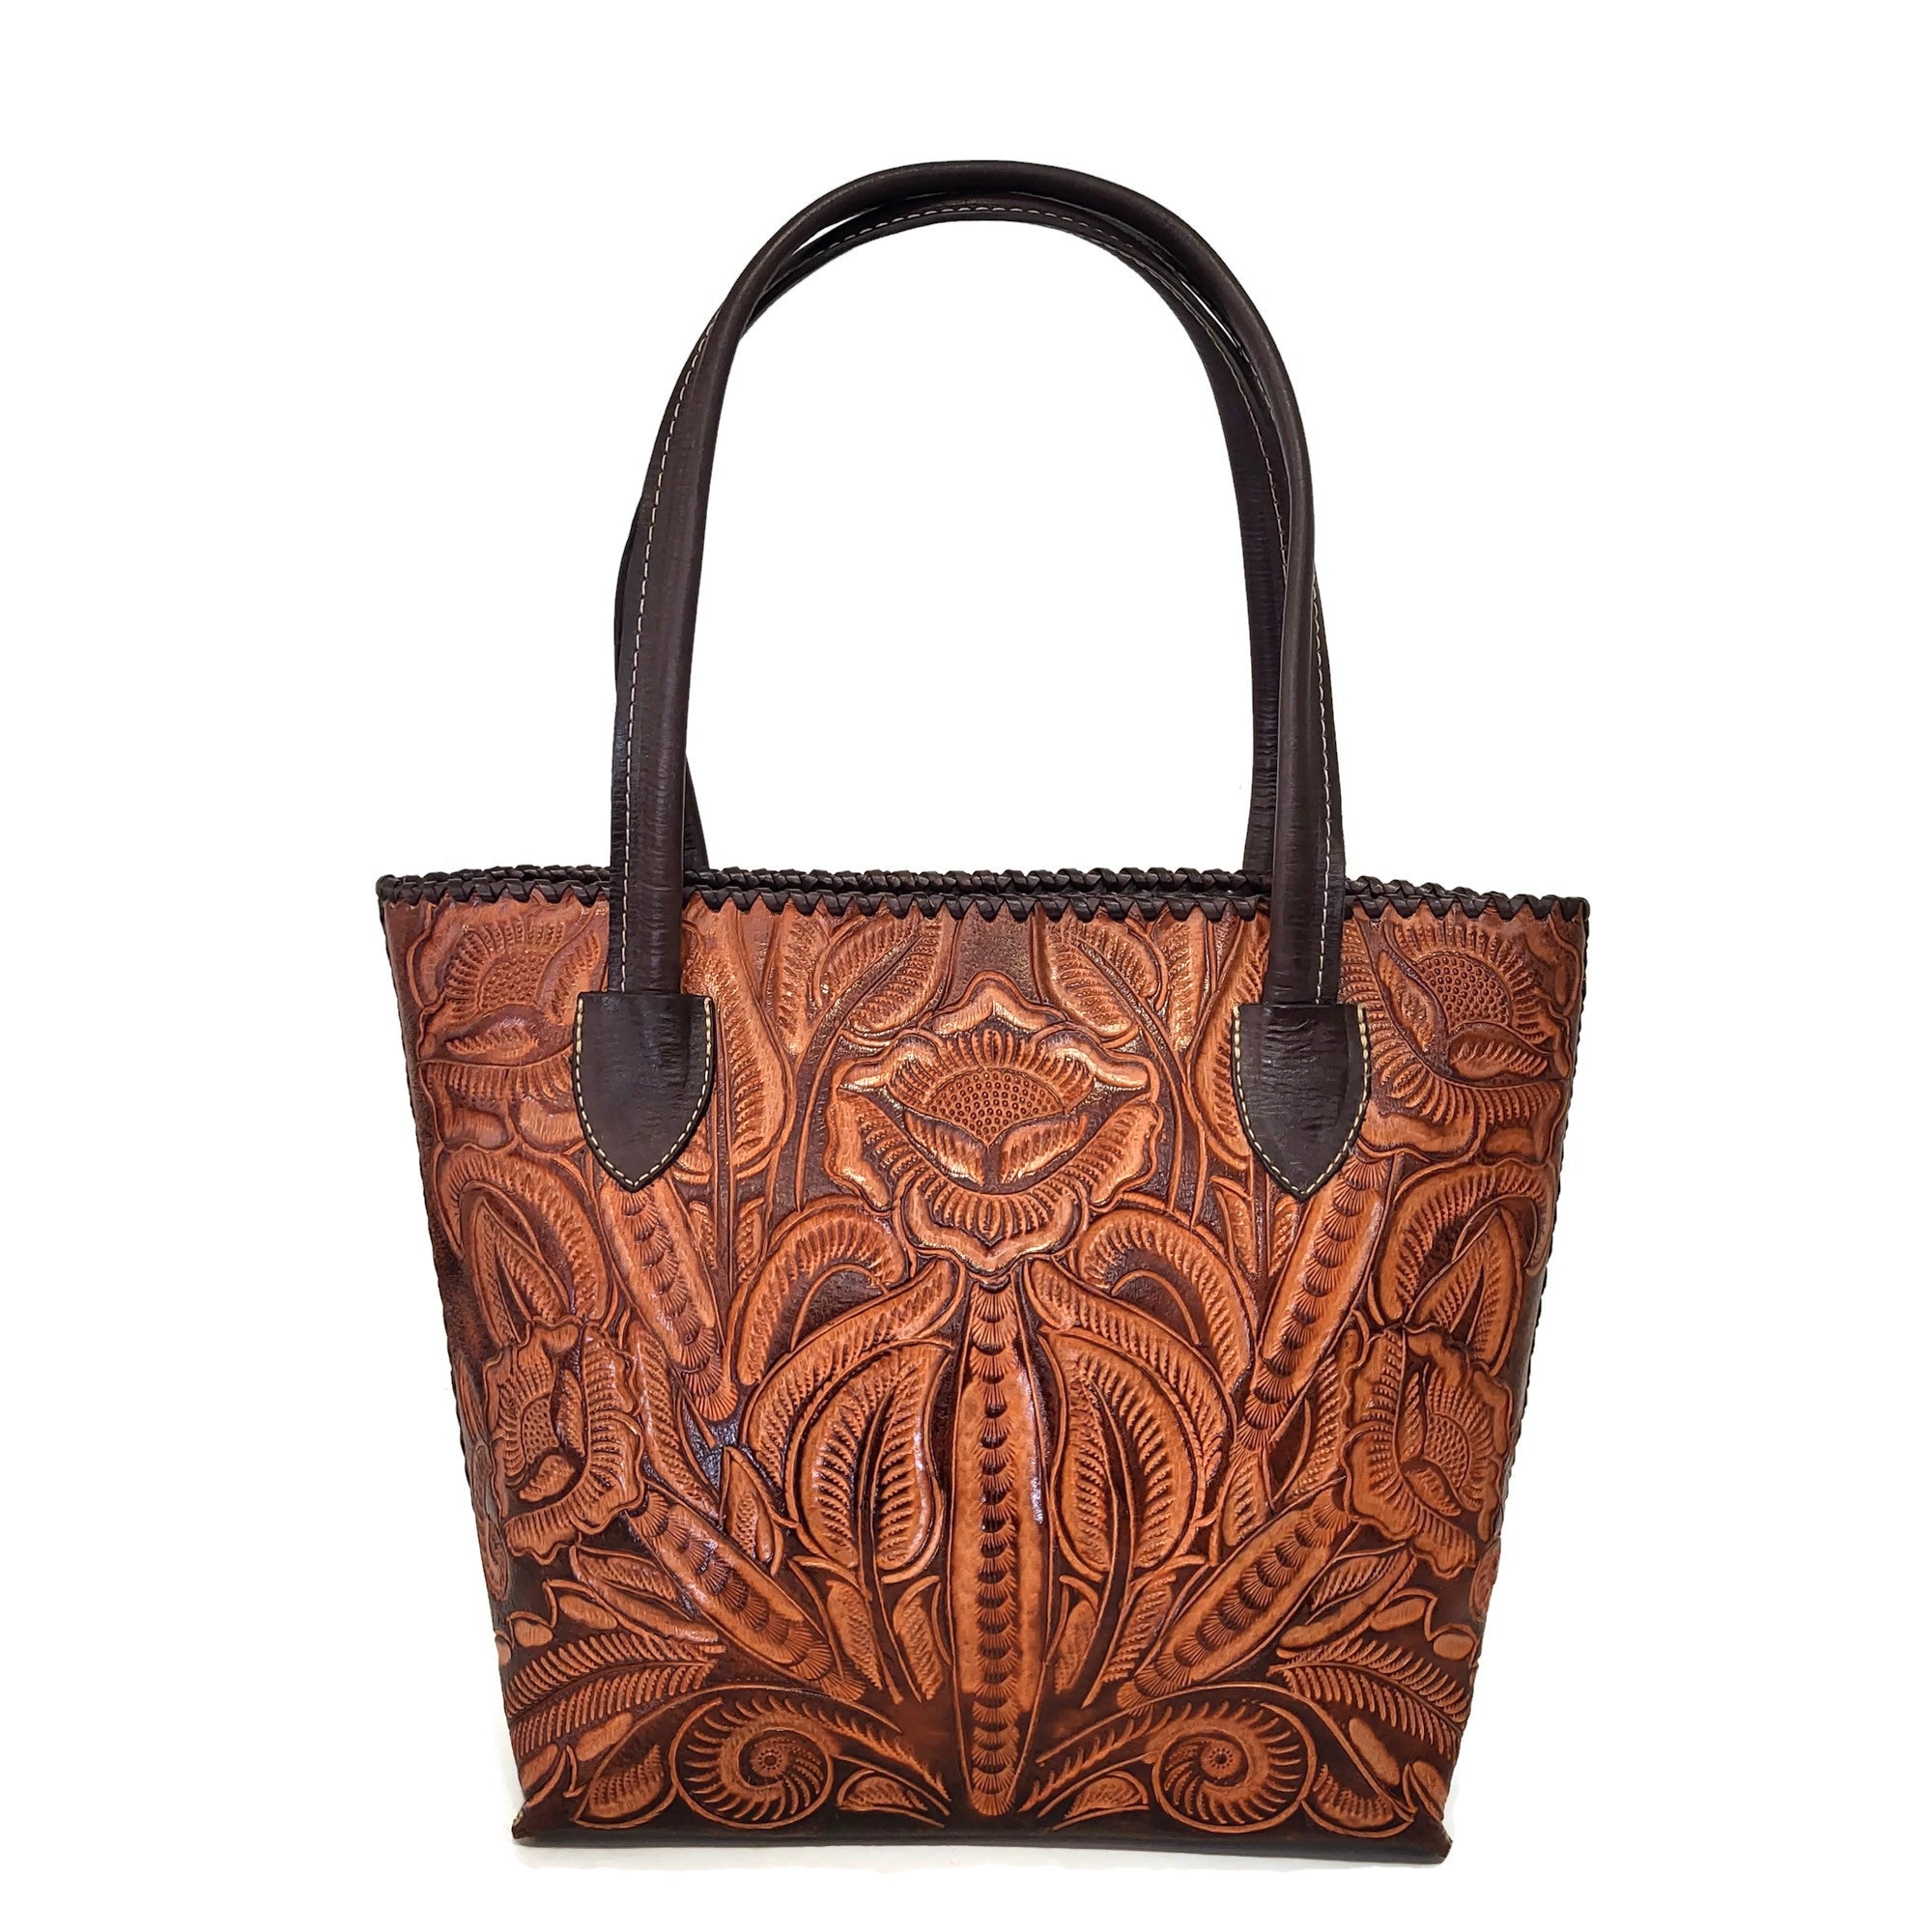 Tote bag, Hand tooled leather, leather handbag,  leather women purse